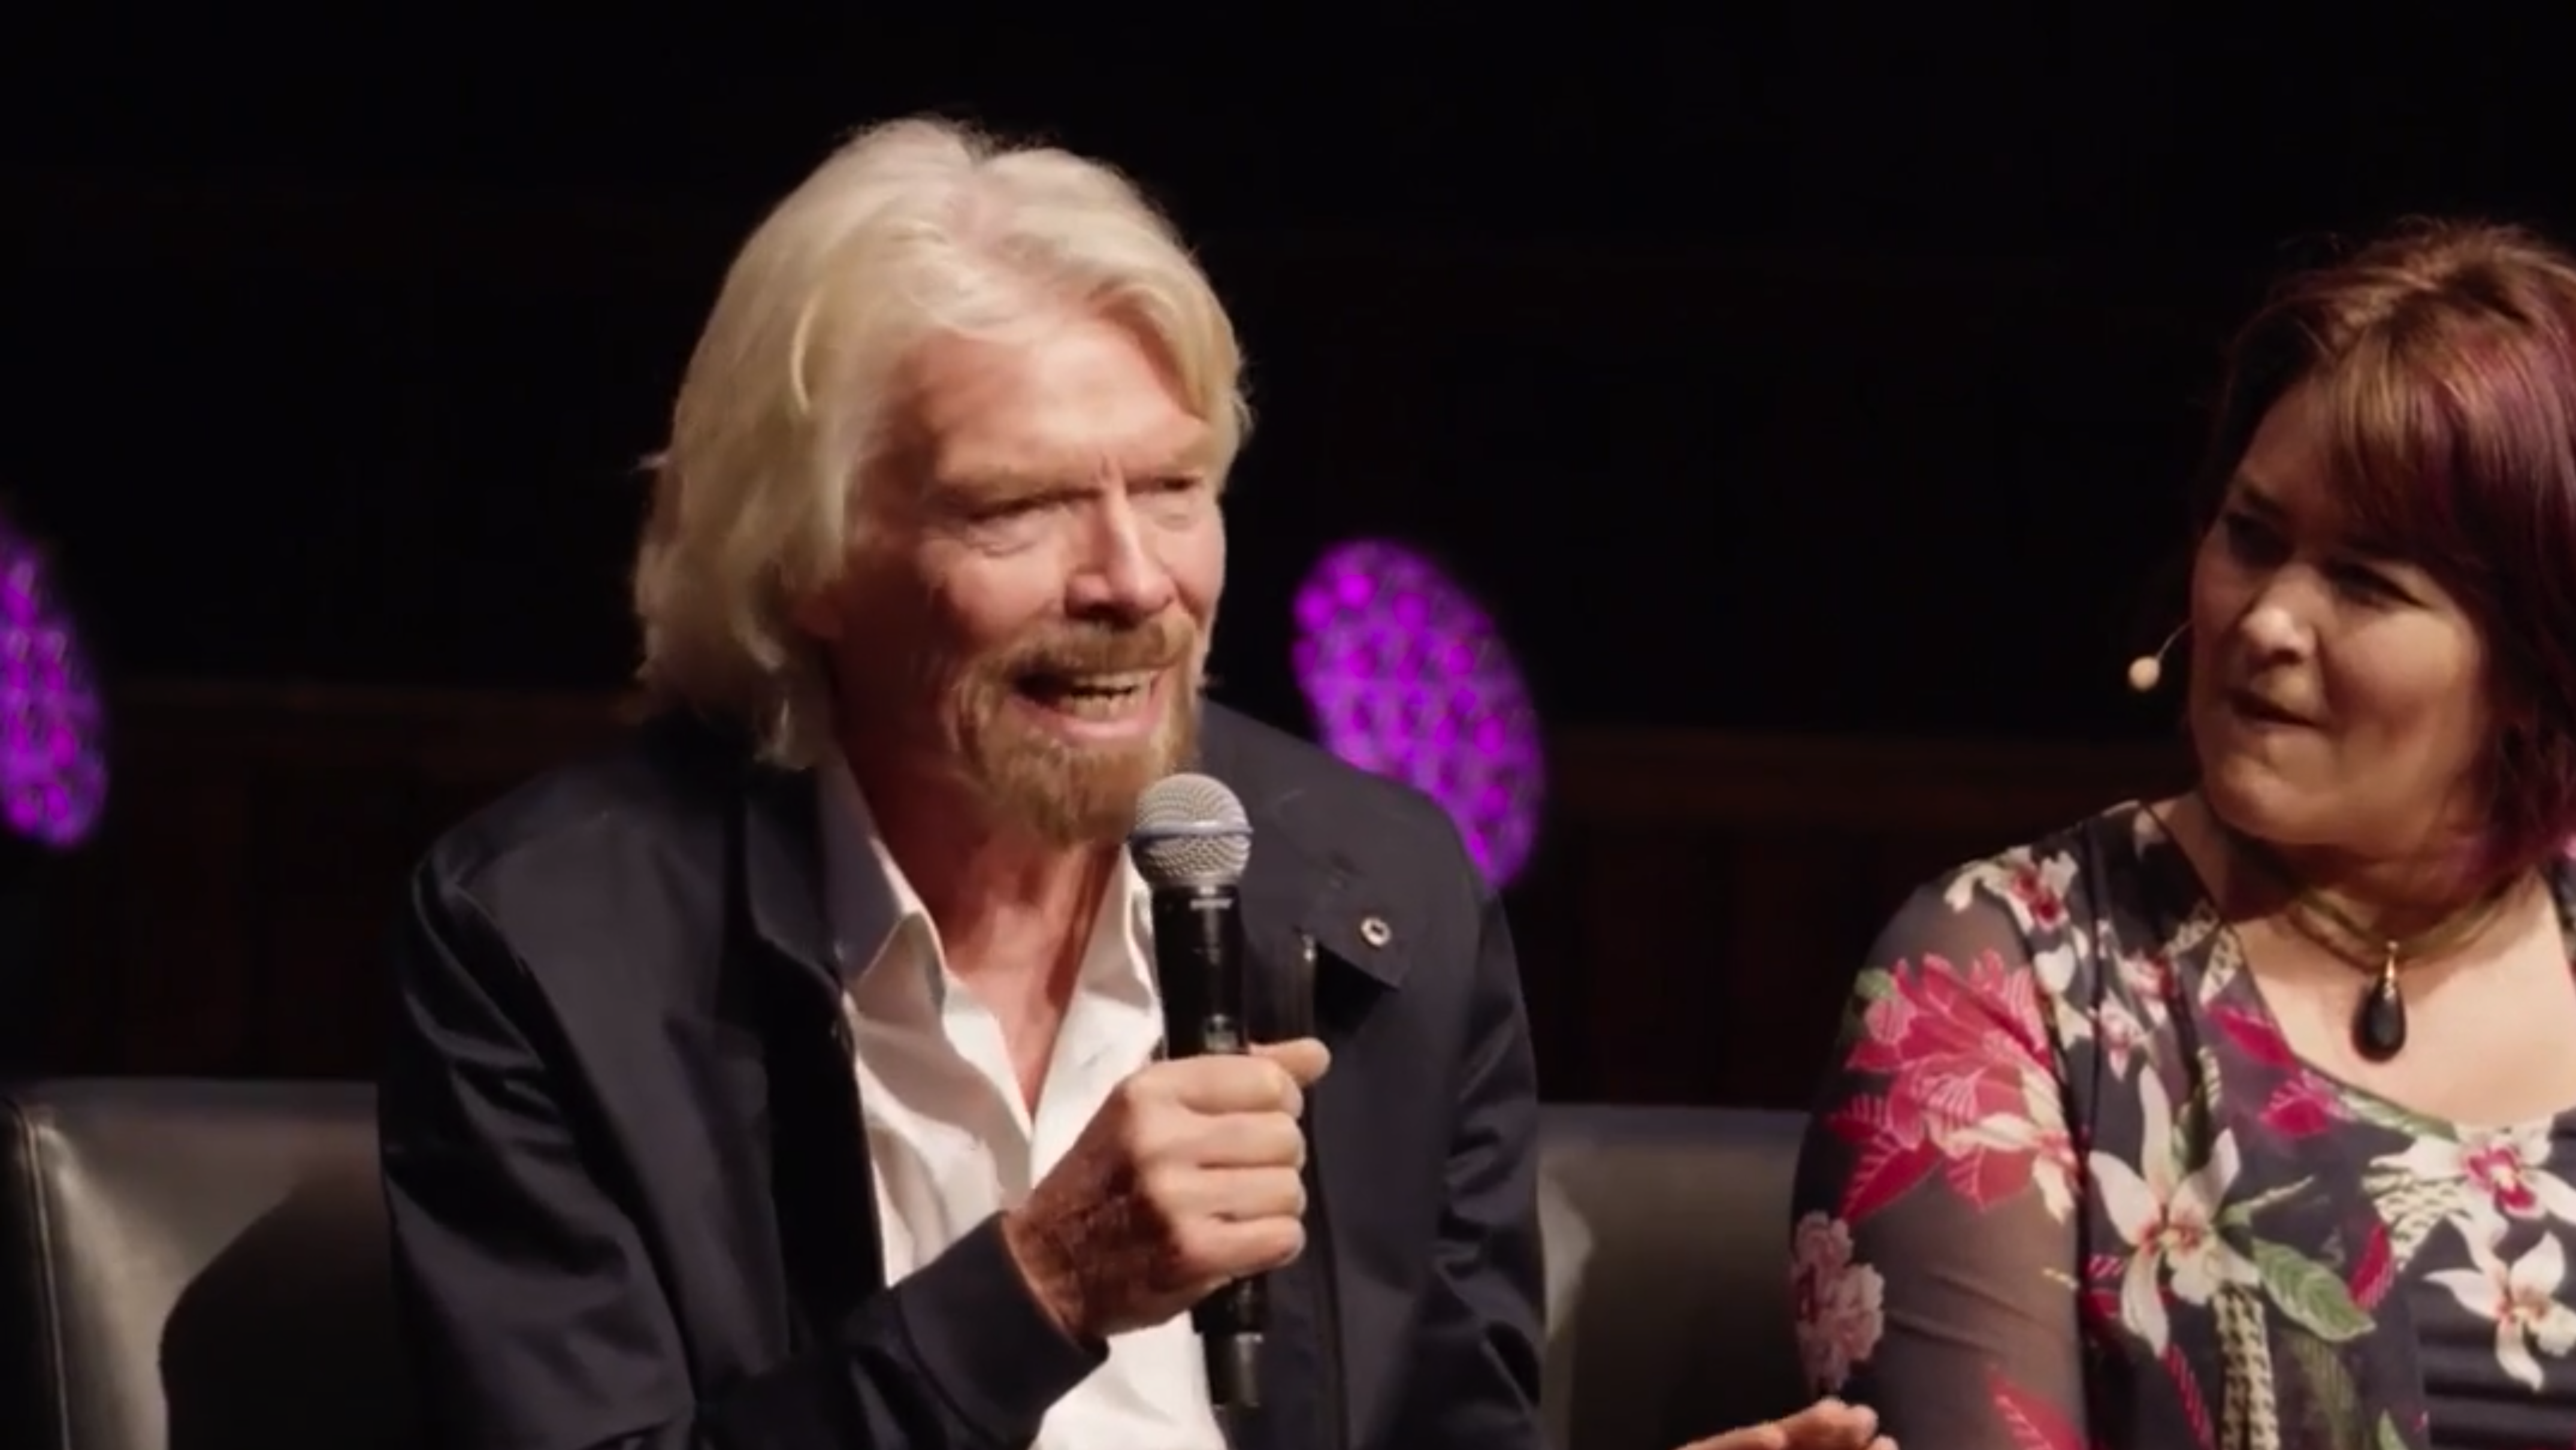 Sir Richard Branson sits on a panel of experts to discuss drug law reform